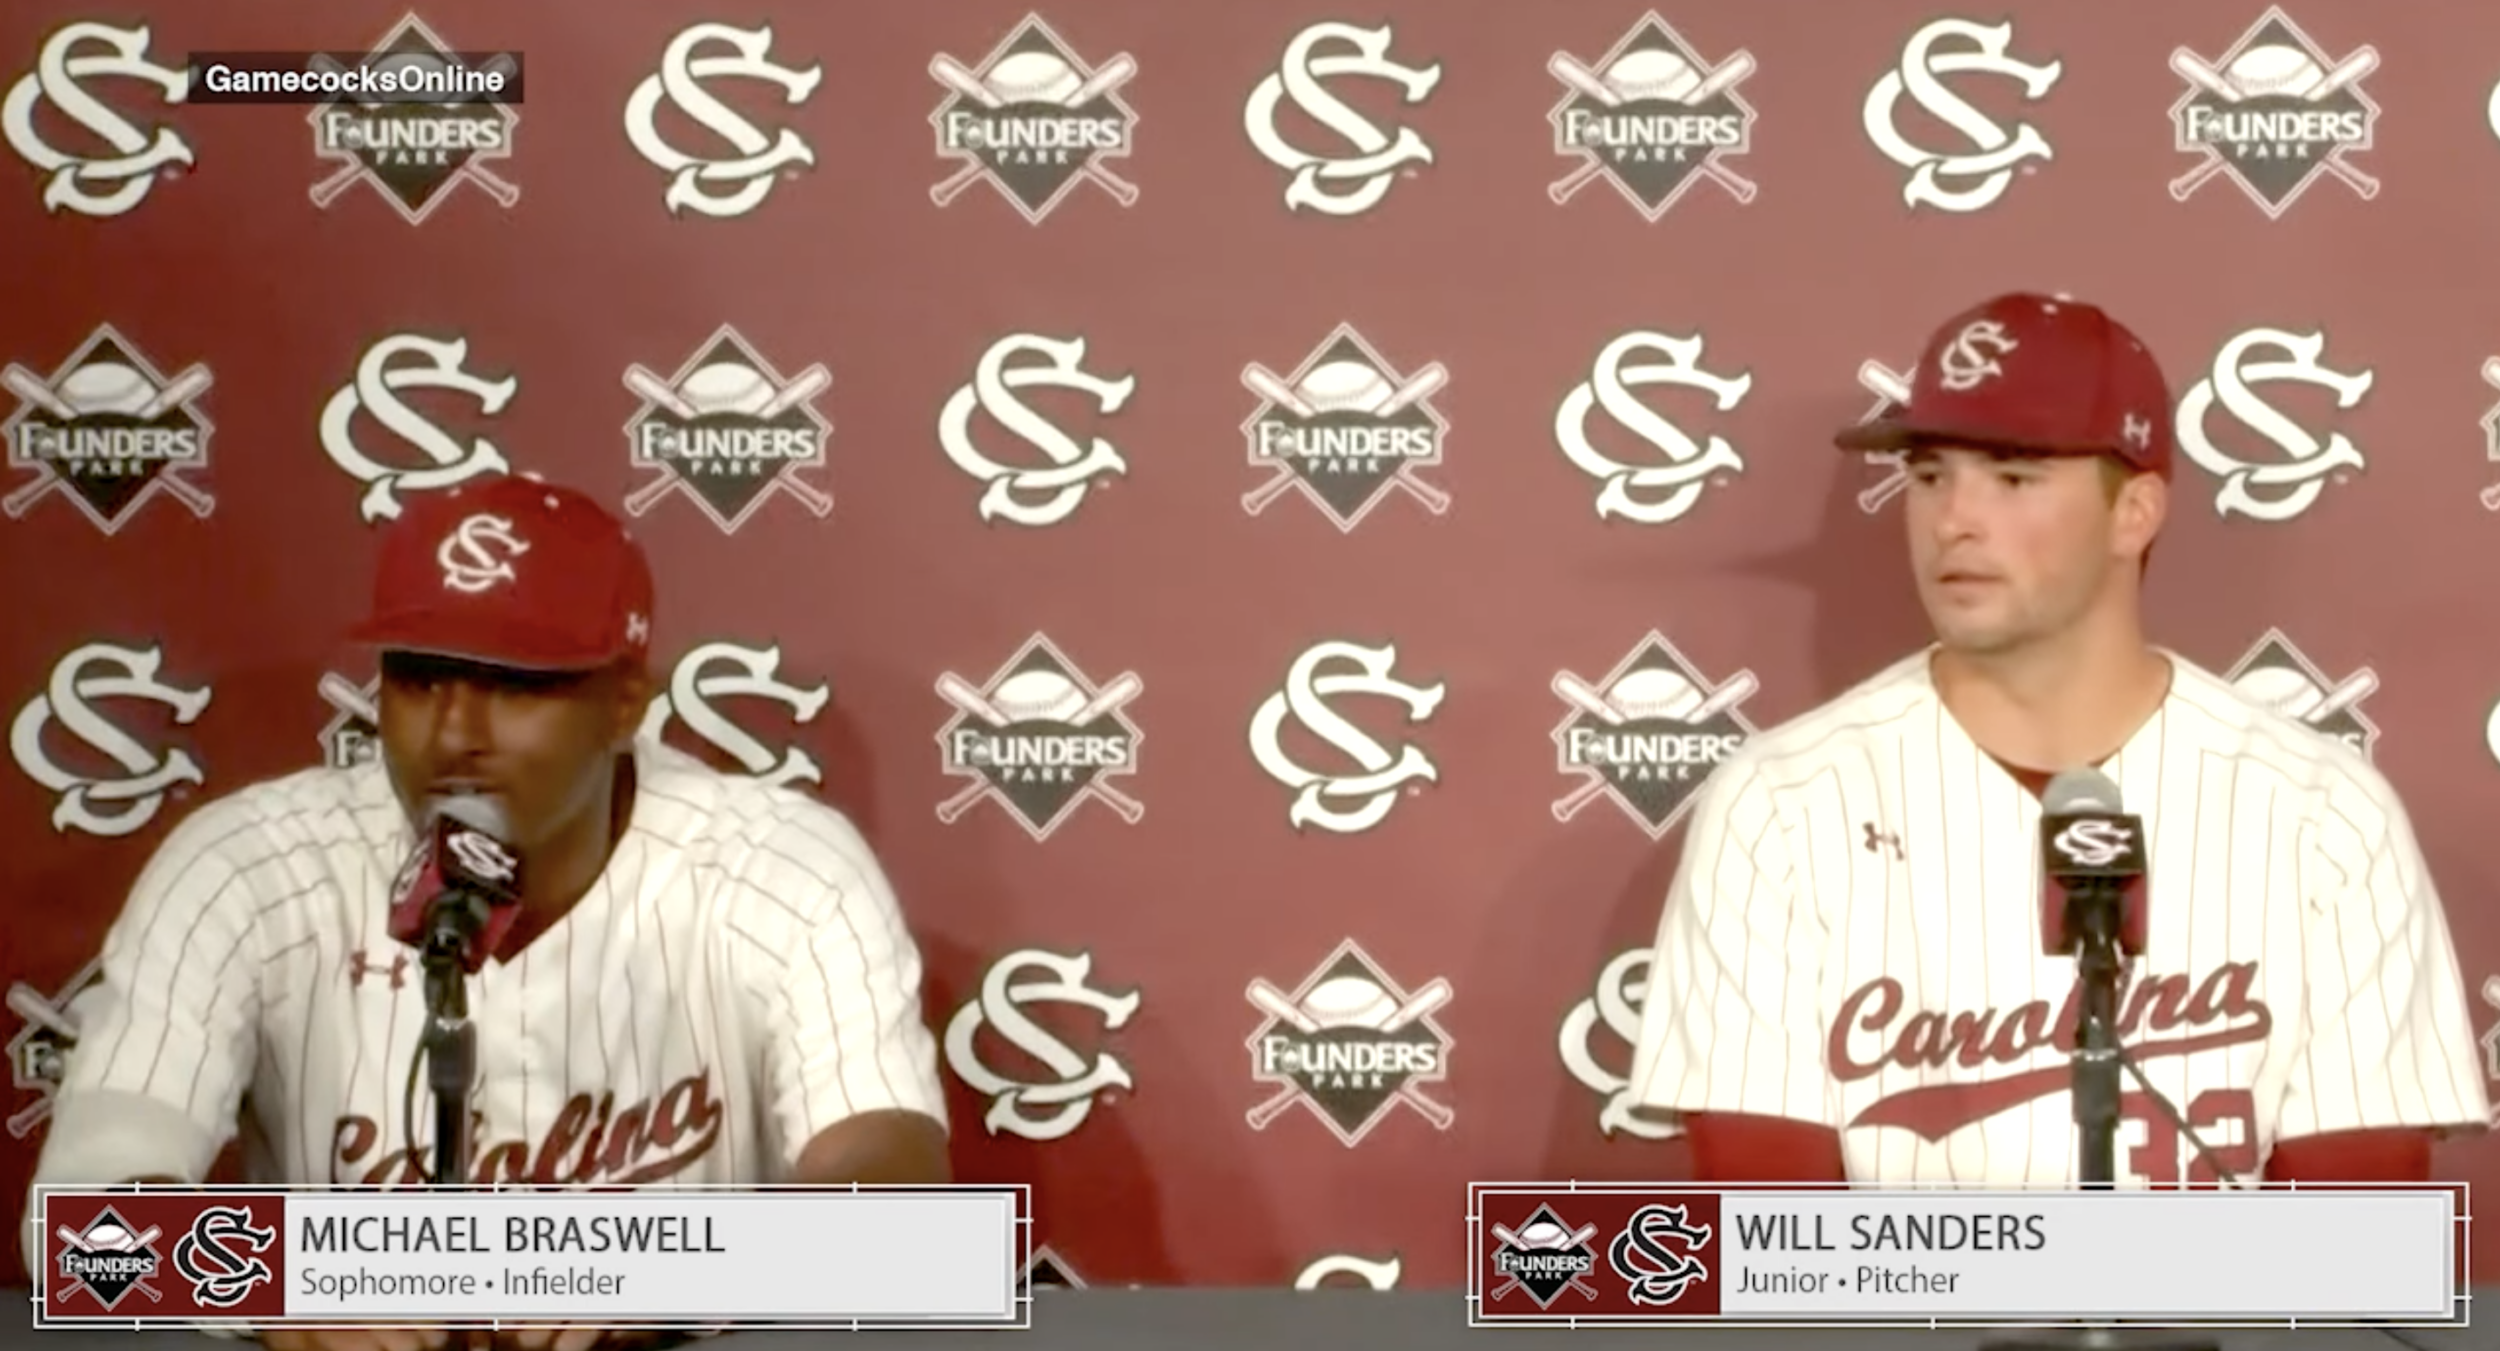 PostGame News Conference: Michael Braswell and Will Sanders - (Florida)